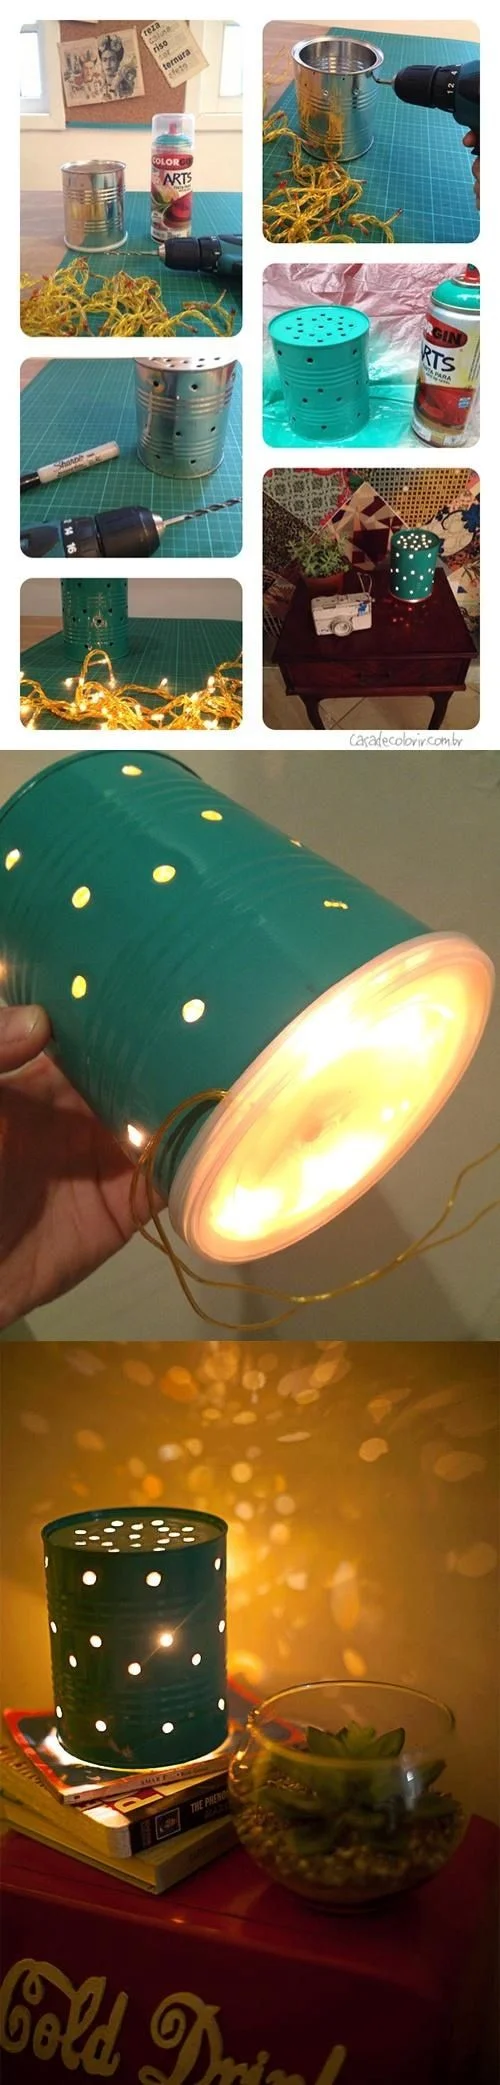 23. Perforate, paint a regular tin can, add a light bulb and you have a cheery disco lamp